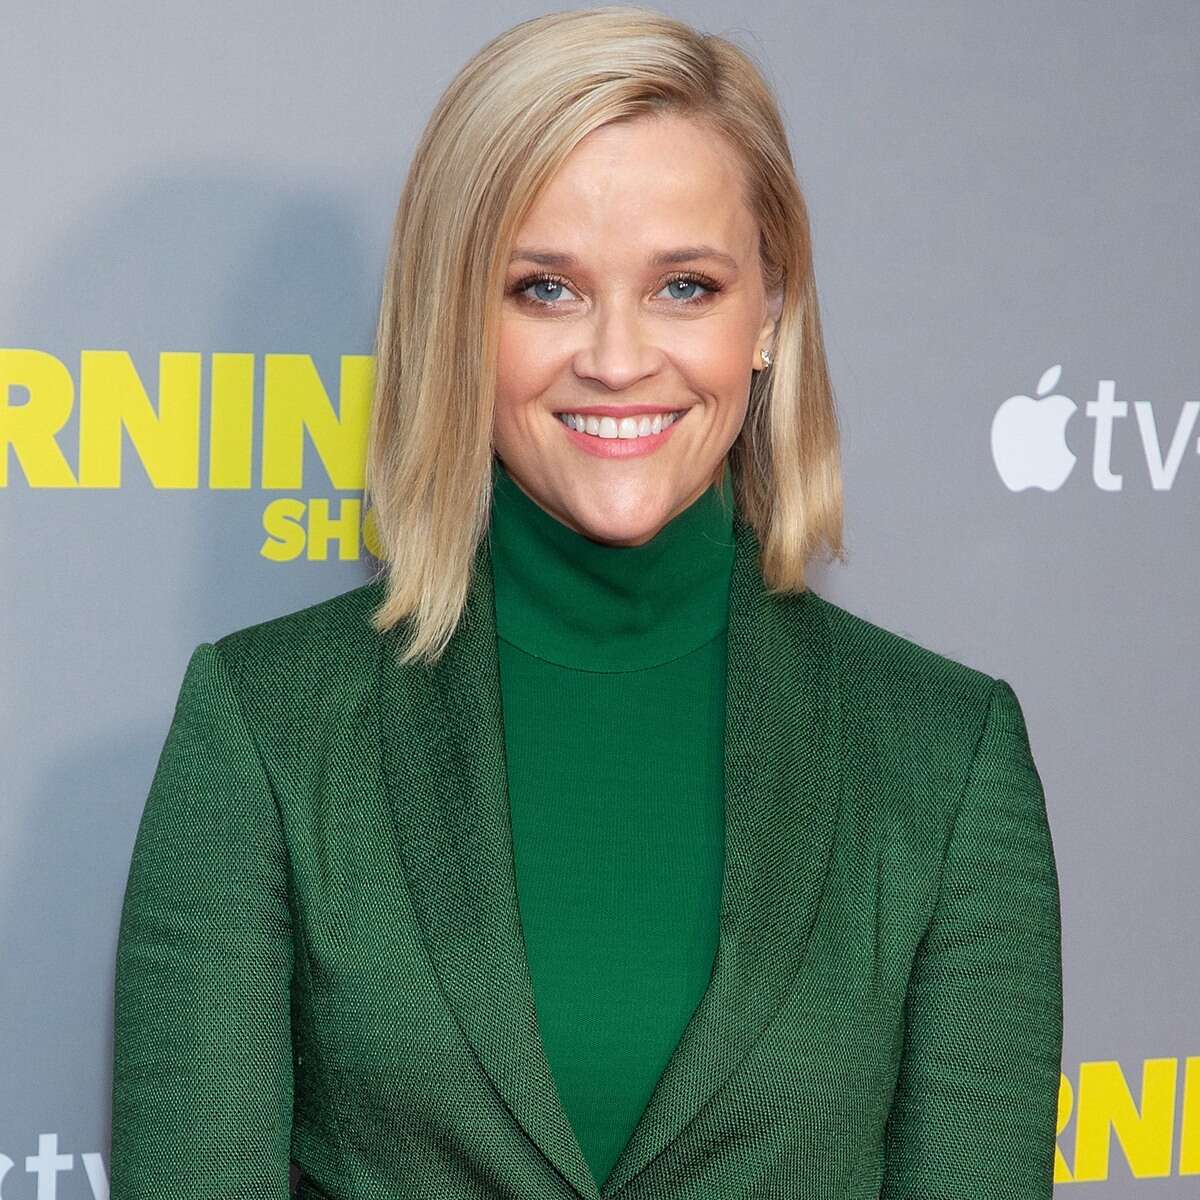 Reese Witherspoon is now world’s richest actress